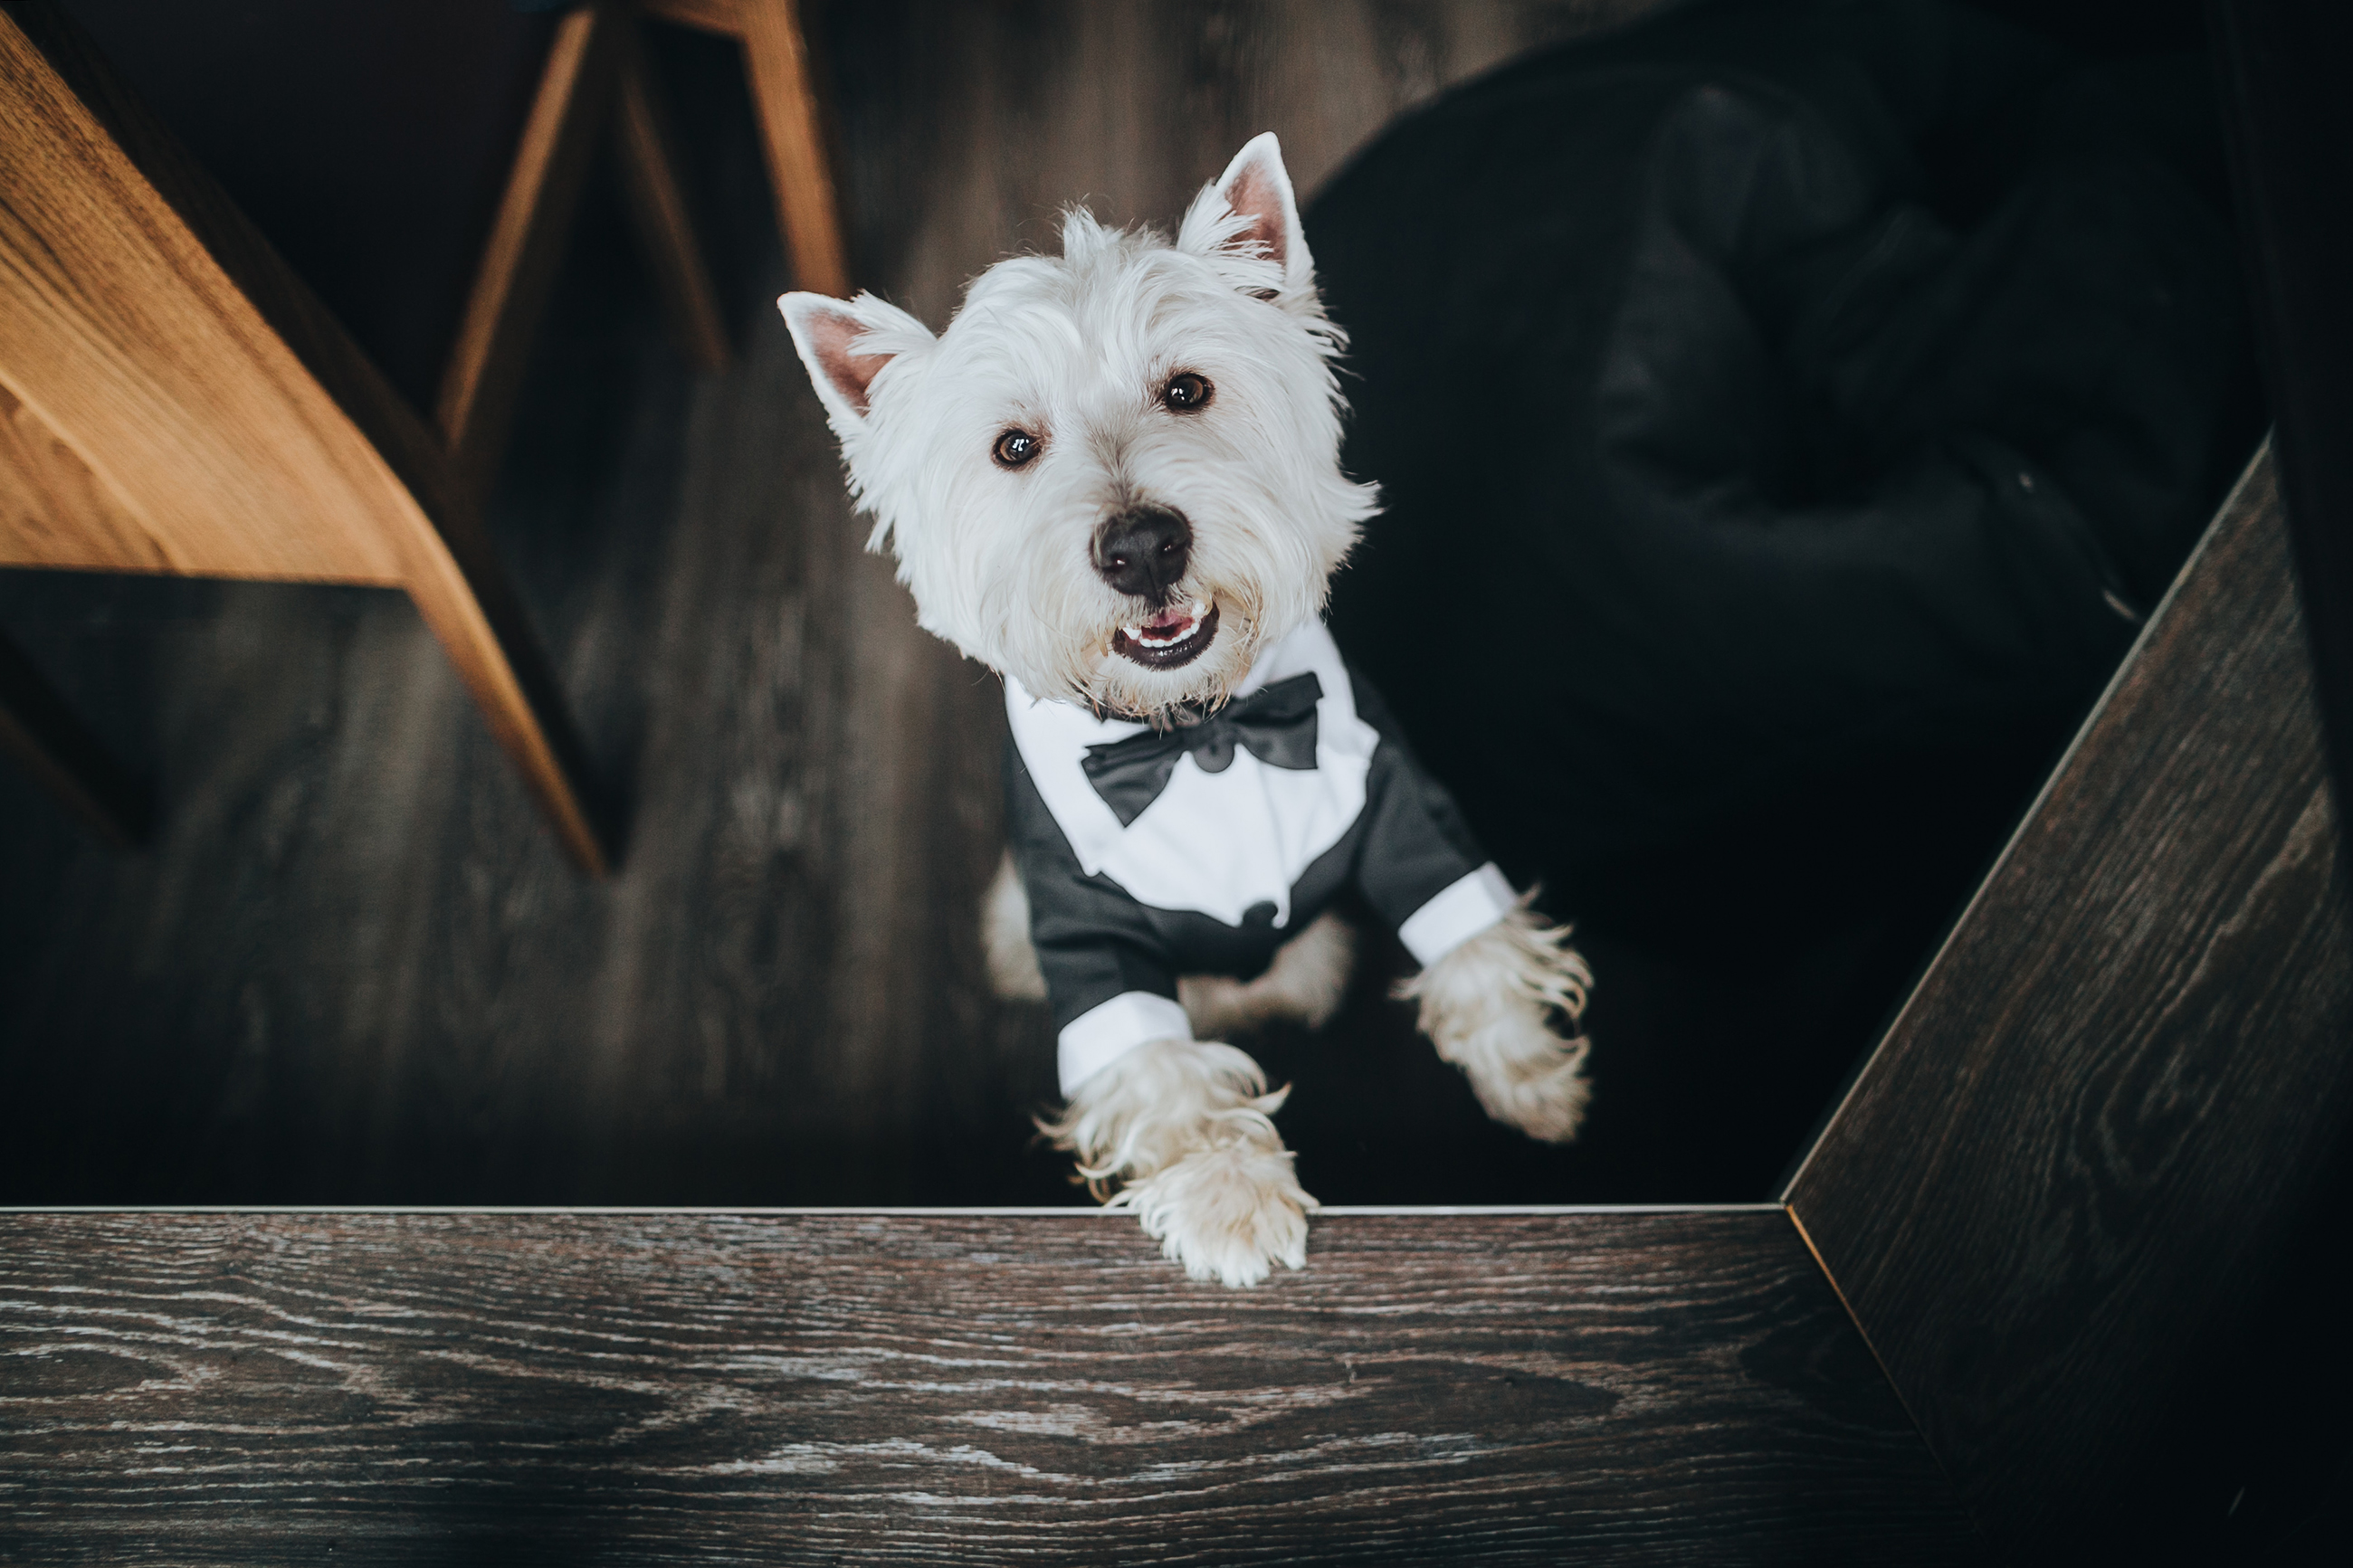 7 Tips To Make Your Pet Instagram Famous - Depositphotos Blog